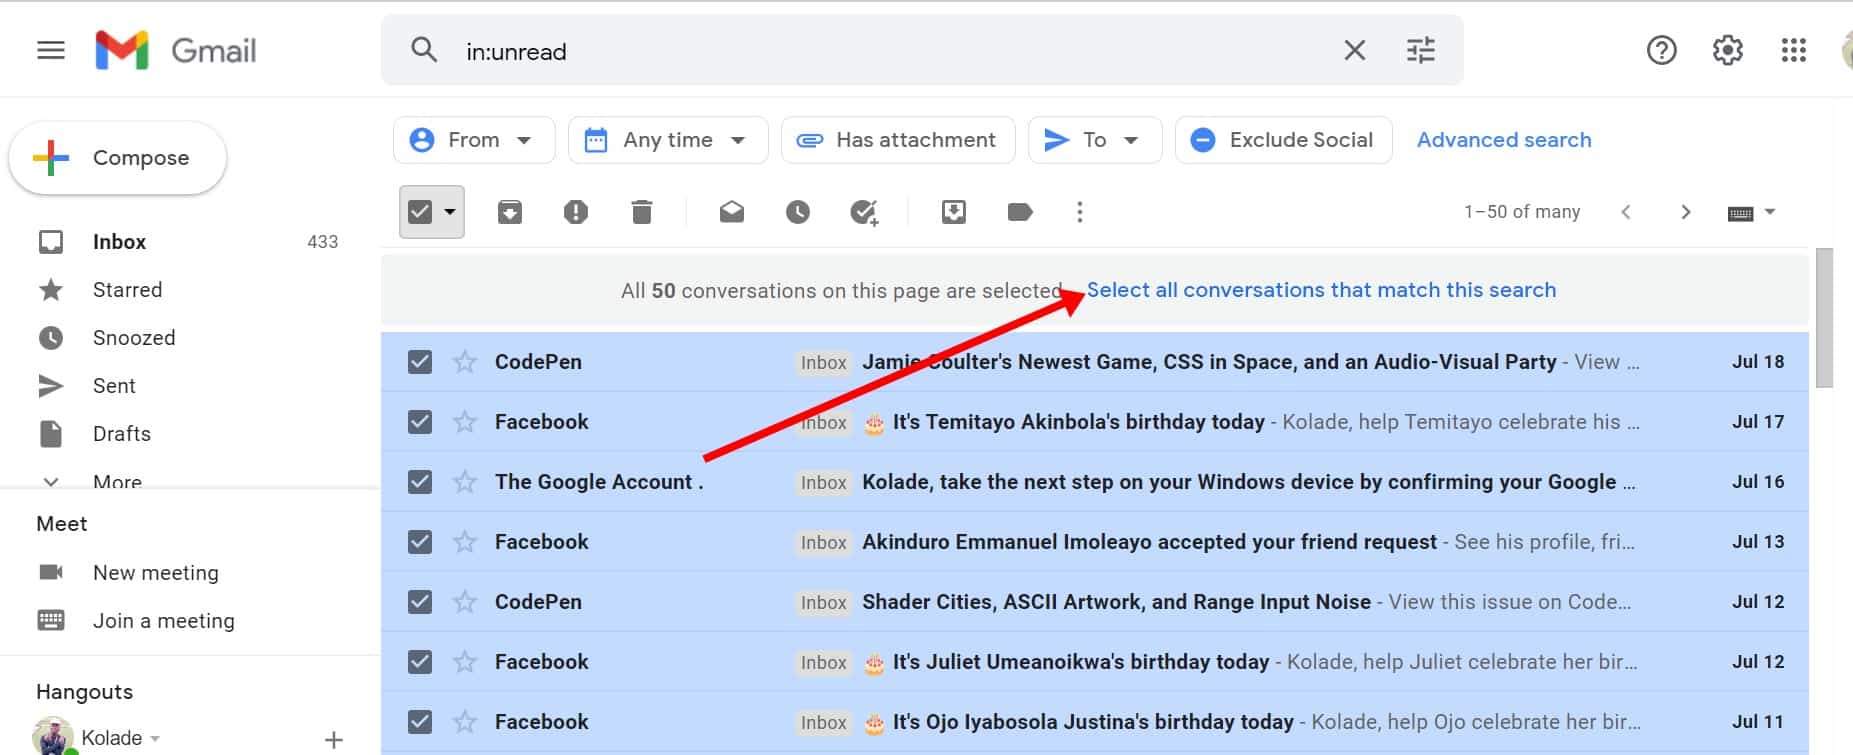 how to auto delete old emails in gmail